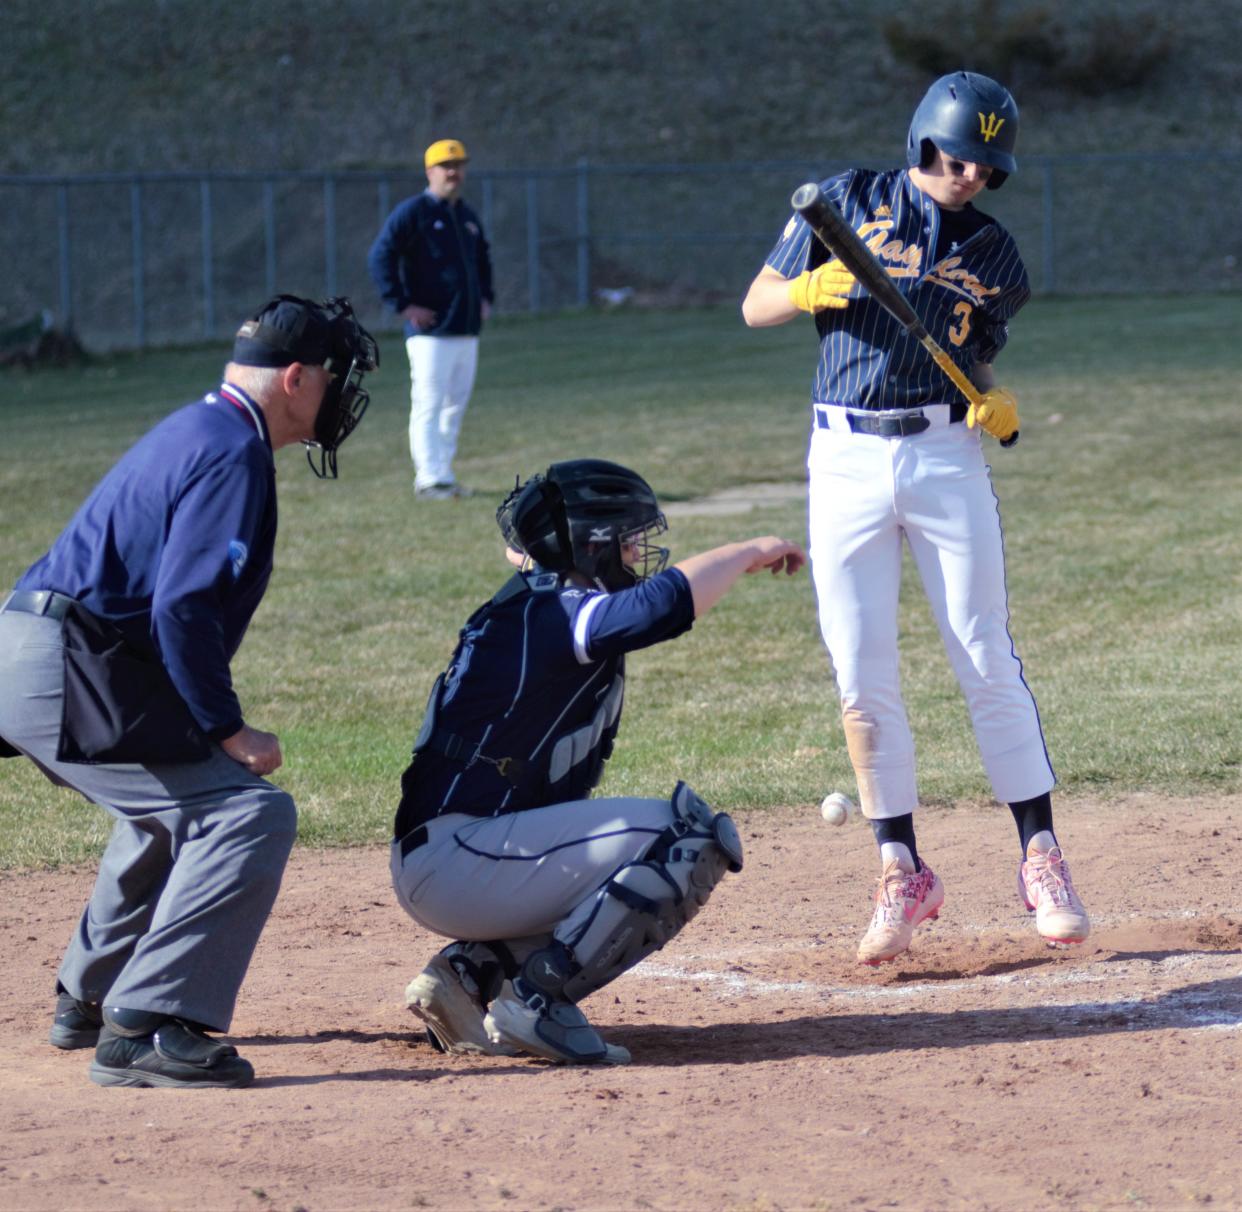 Will Bethuy had a big game at the plate in a weekend win for Gaylord.